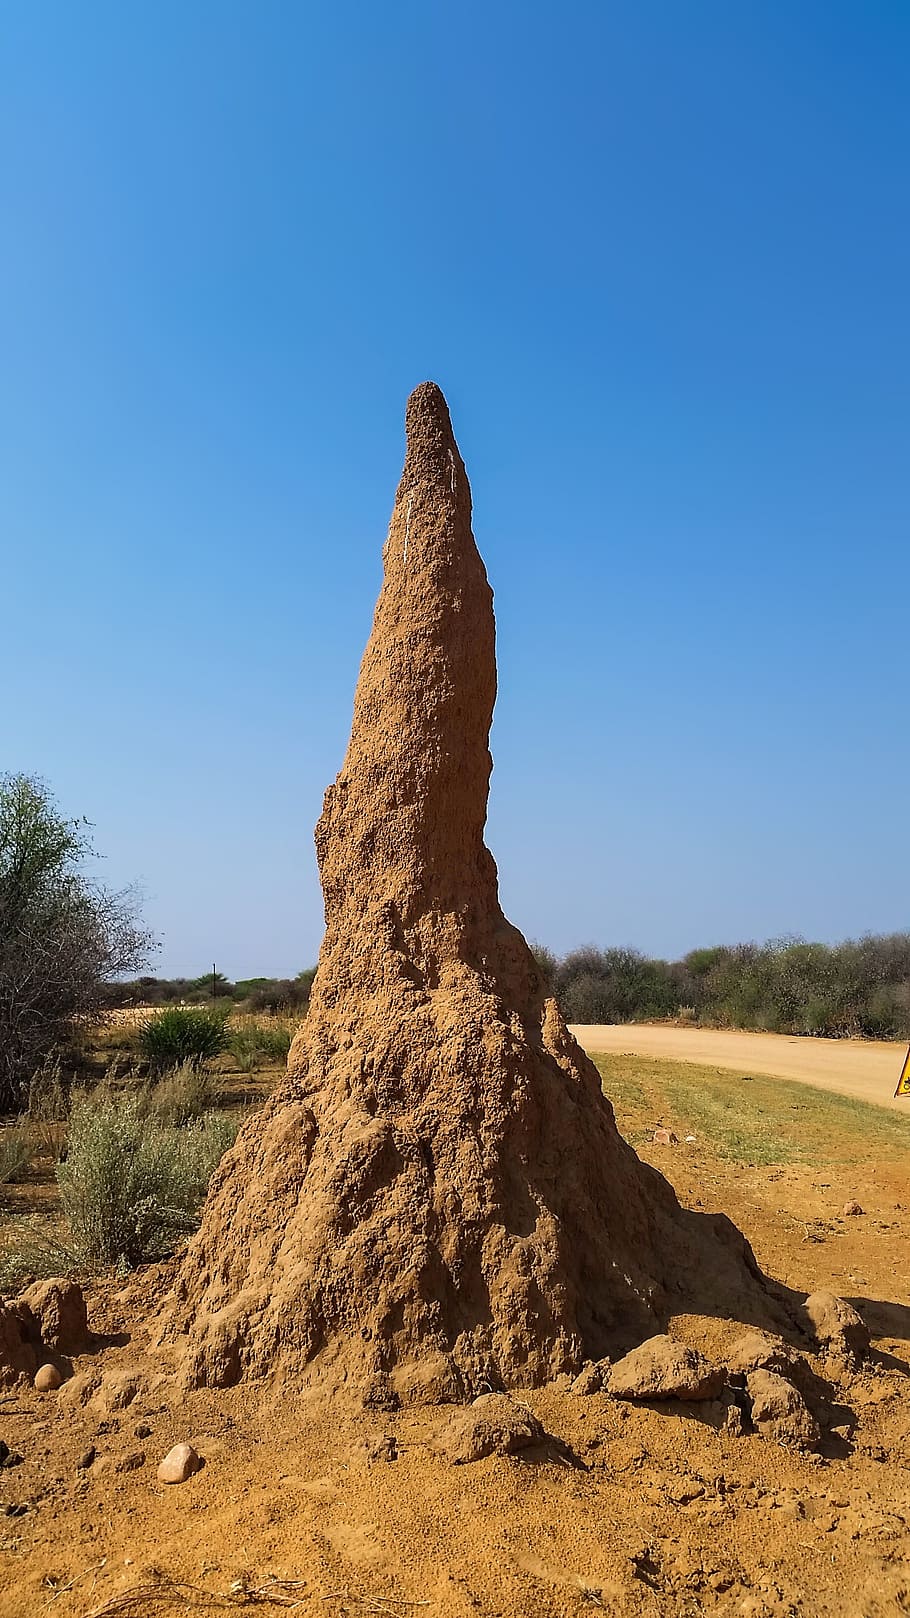 termite hill, termites, ants, anthill, termitenbau, africa, namibia, nature, dry, heiss